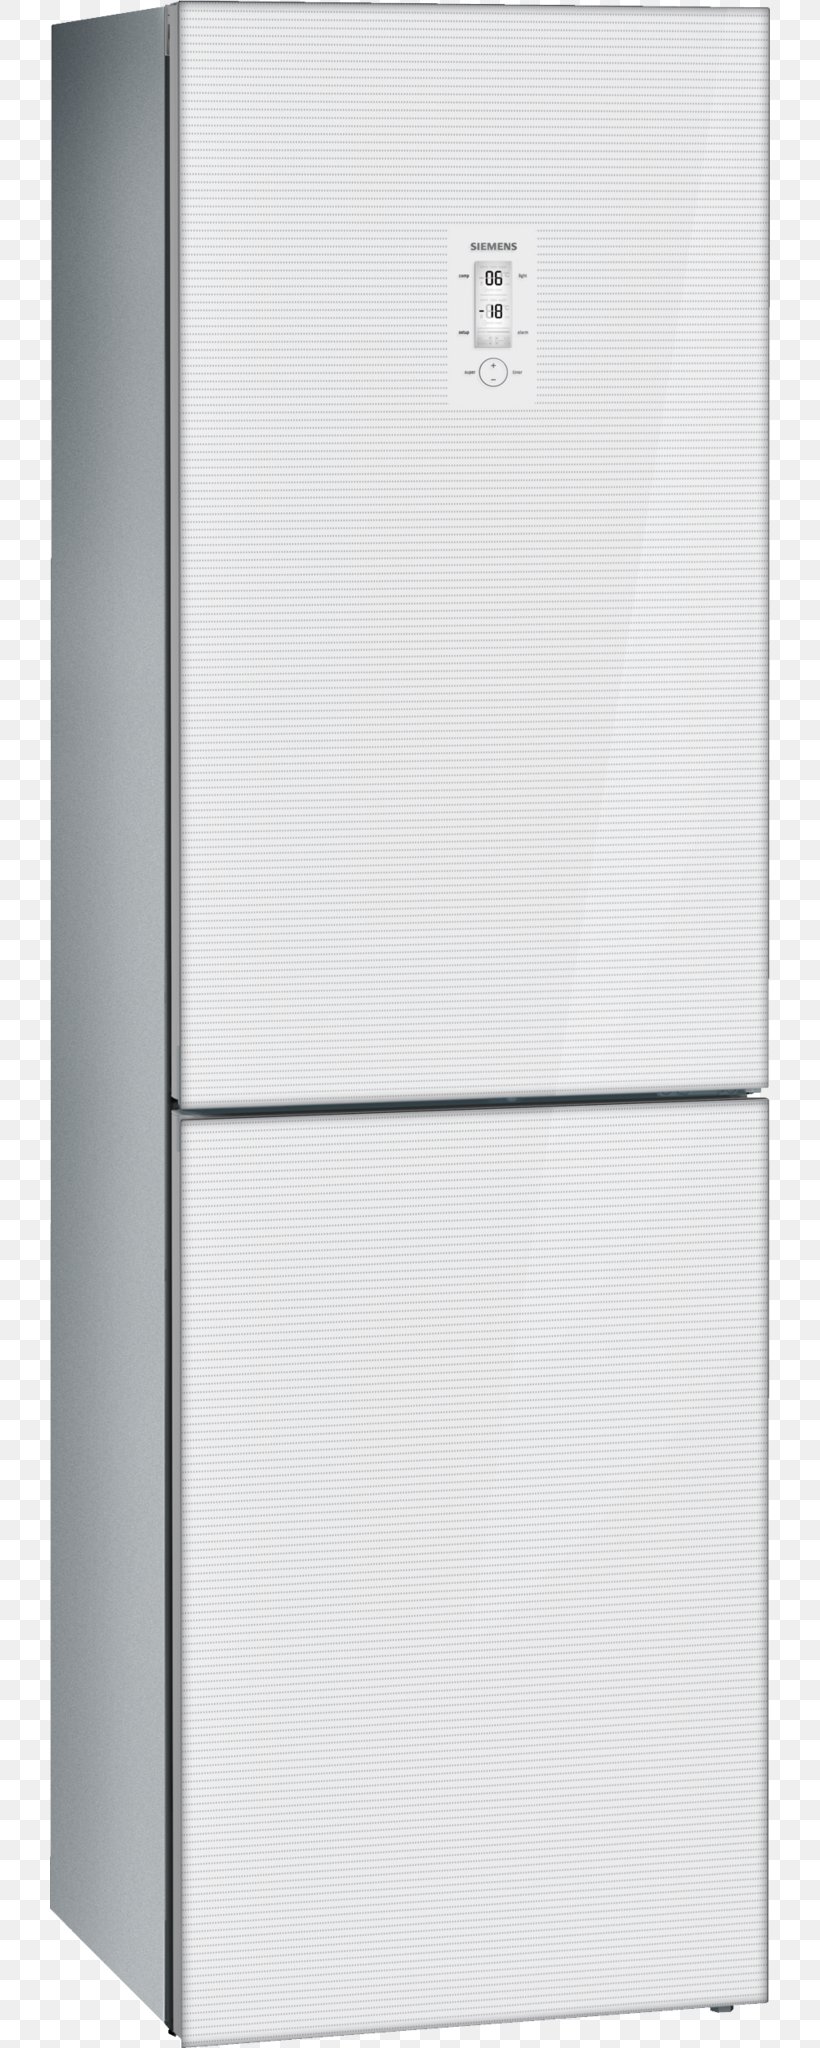 Minsk Refrigerator Beko Hire Purchase Online Shopping, PNG, 720x2048px, Minsk, Autodefrost, Beko, Filing Cabinet, Hire Purchase Download Free